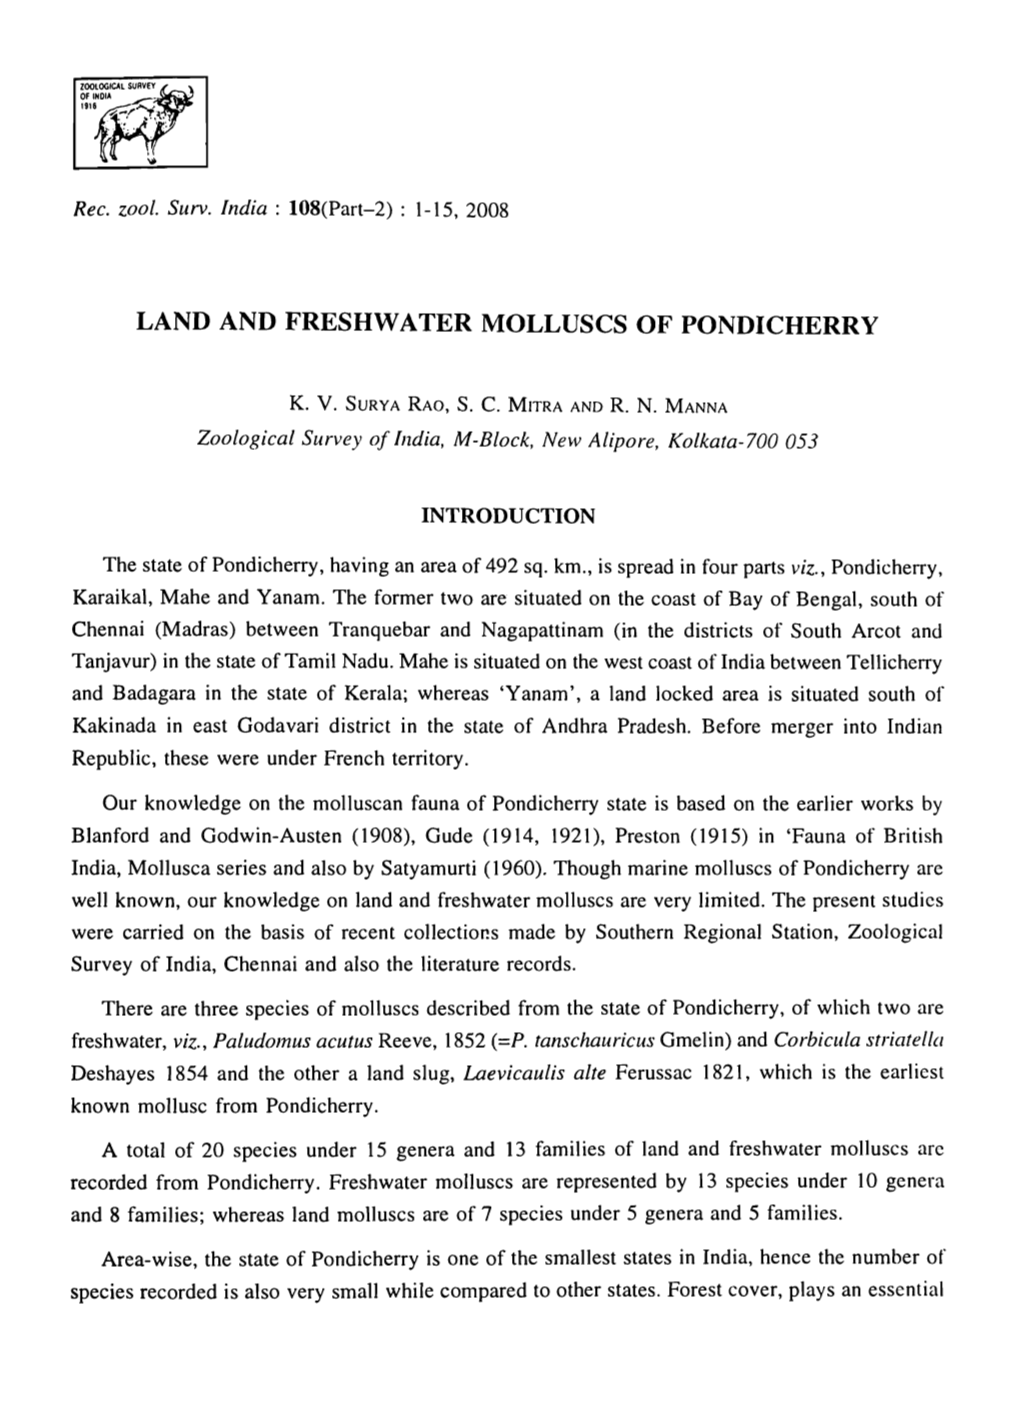 Land and Freshwater Molluscs of Pondicherry